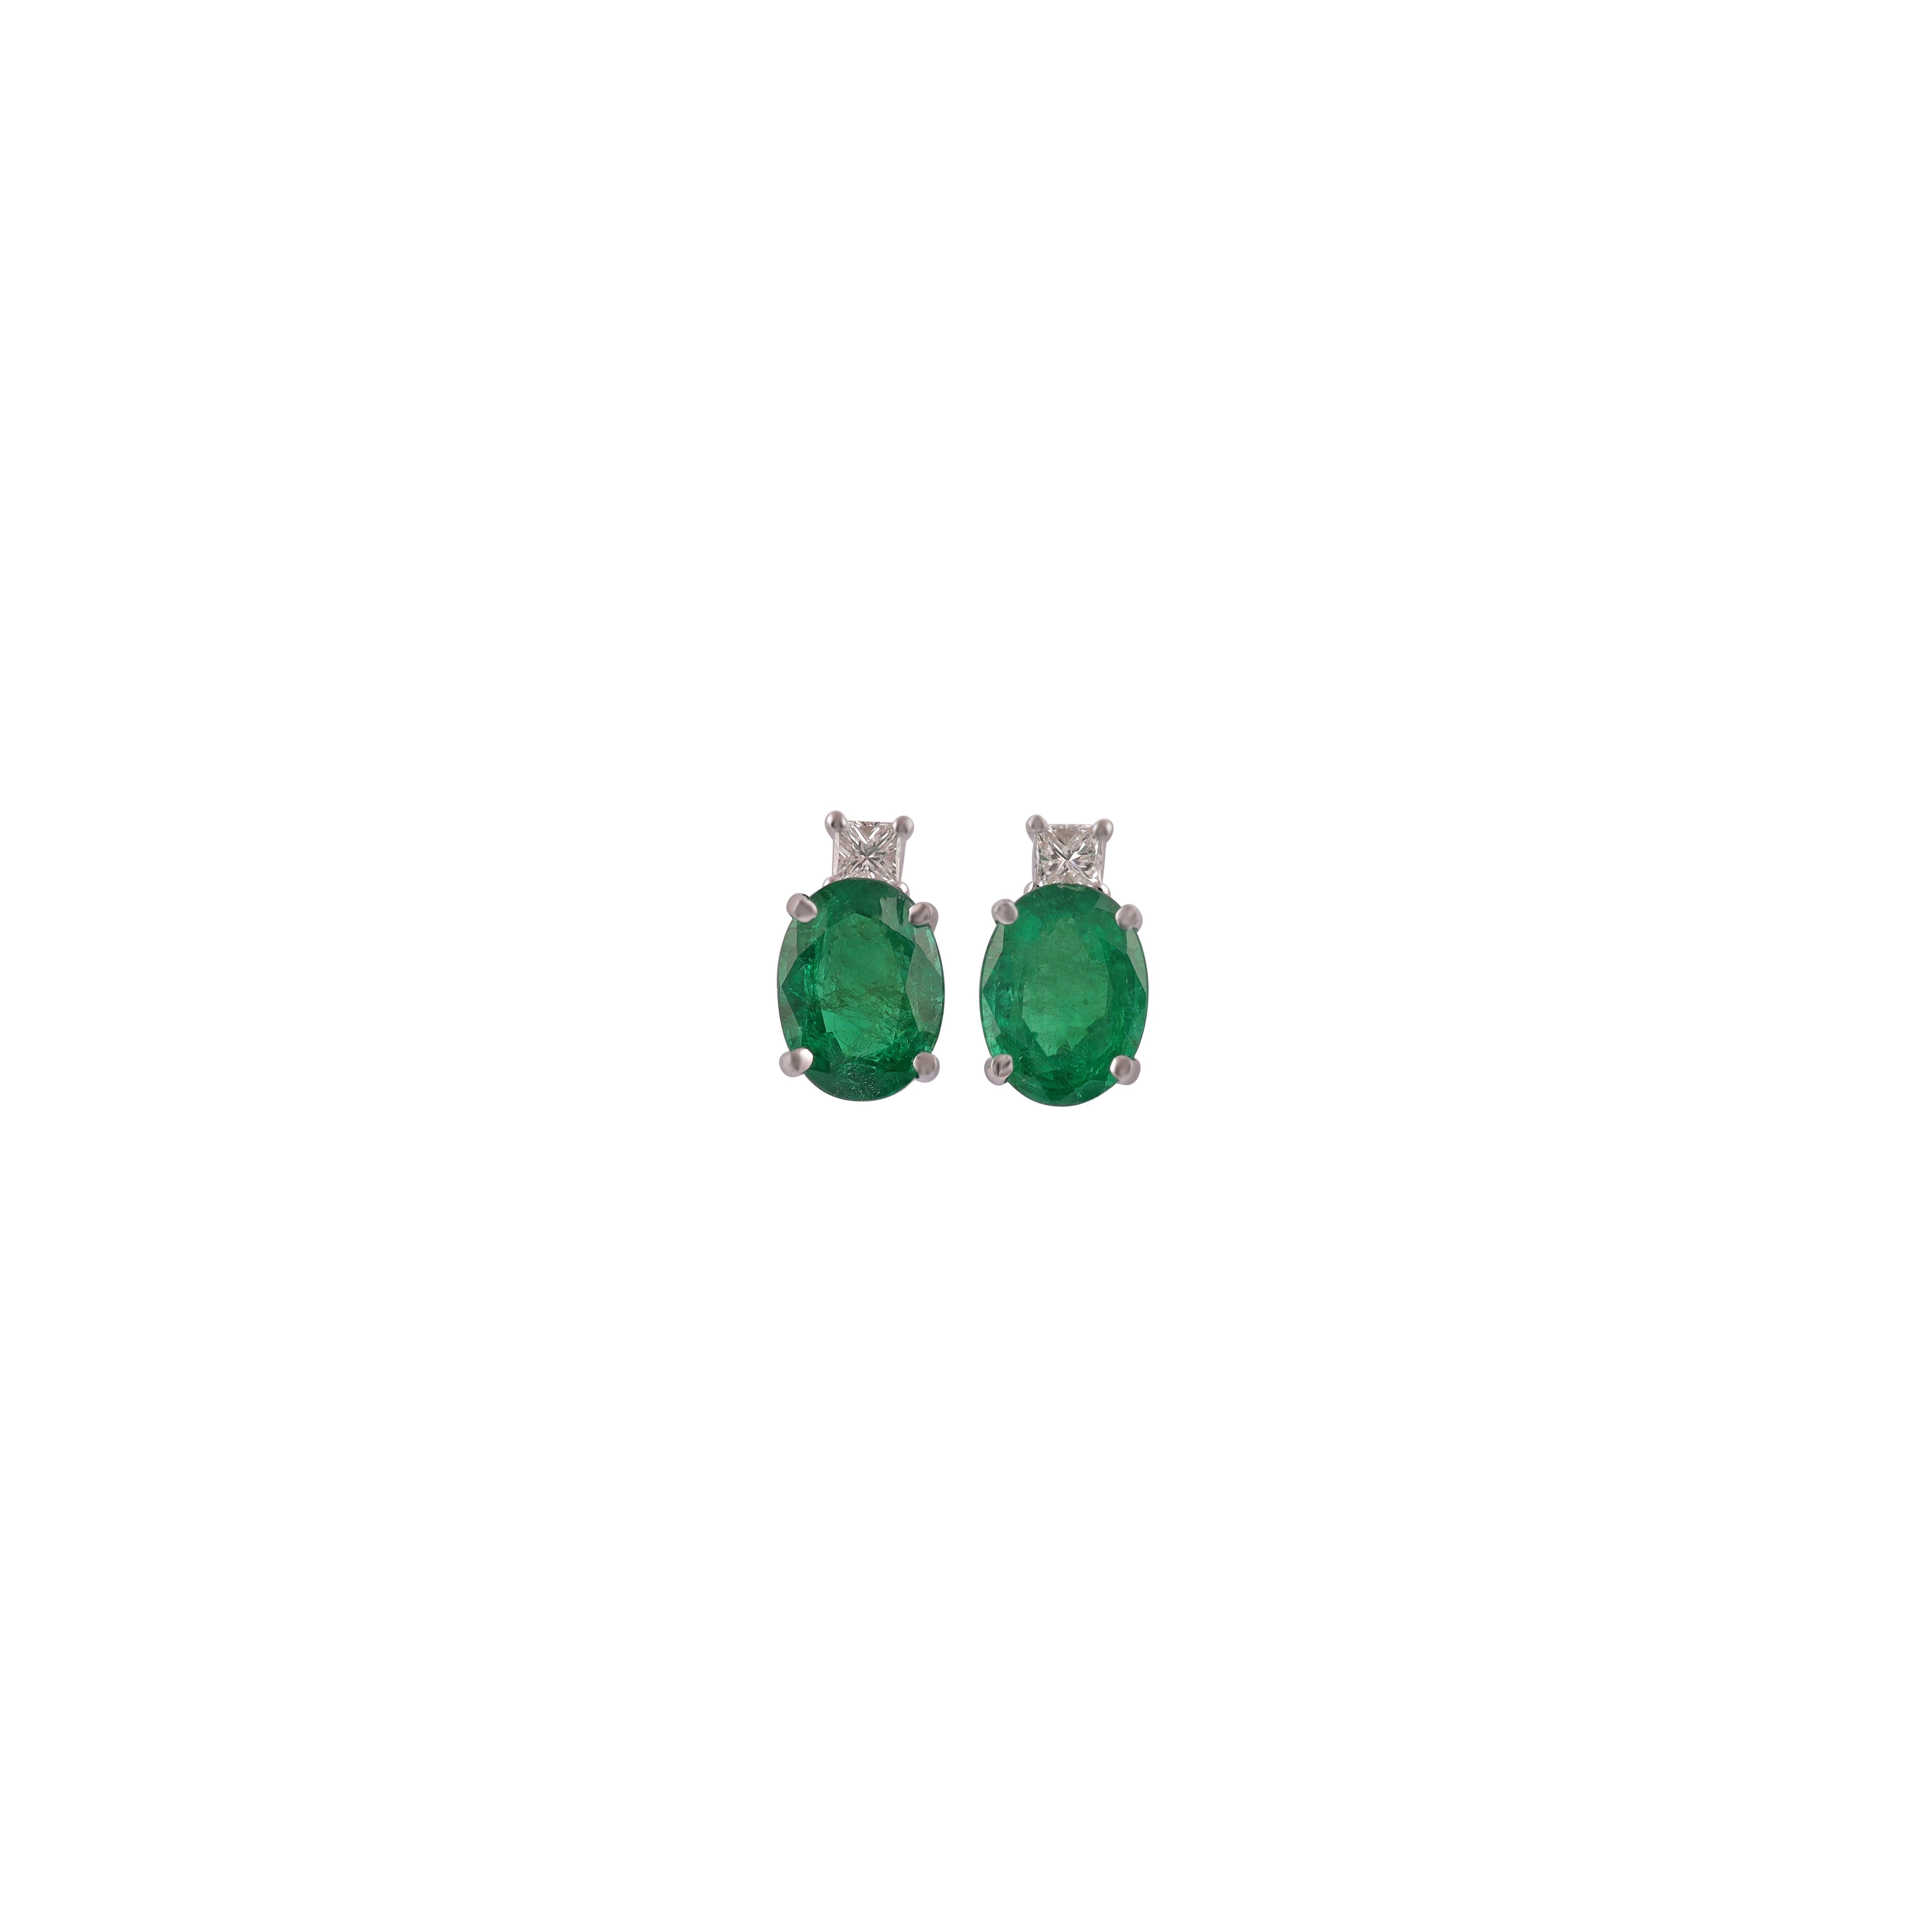 Magnificent Zambian Emerald and Diamond Earring 
oval  cut Zambian Emerald approx. 2.54 CTS
2 Round brilliant cut diamonds 0.19 CTS
18 k White Gold  mounting 2.59 GMS

Custom Services
Request Customization